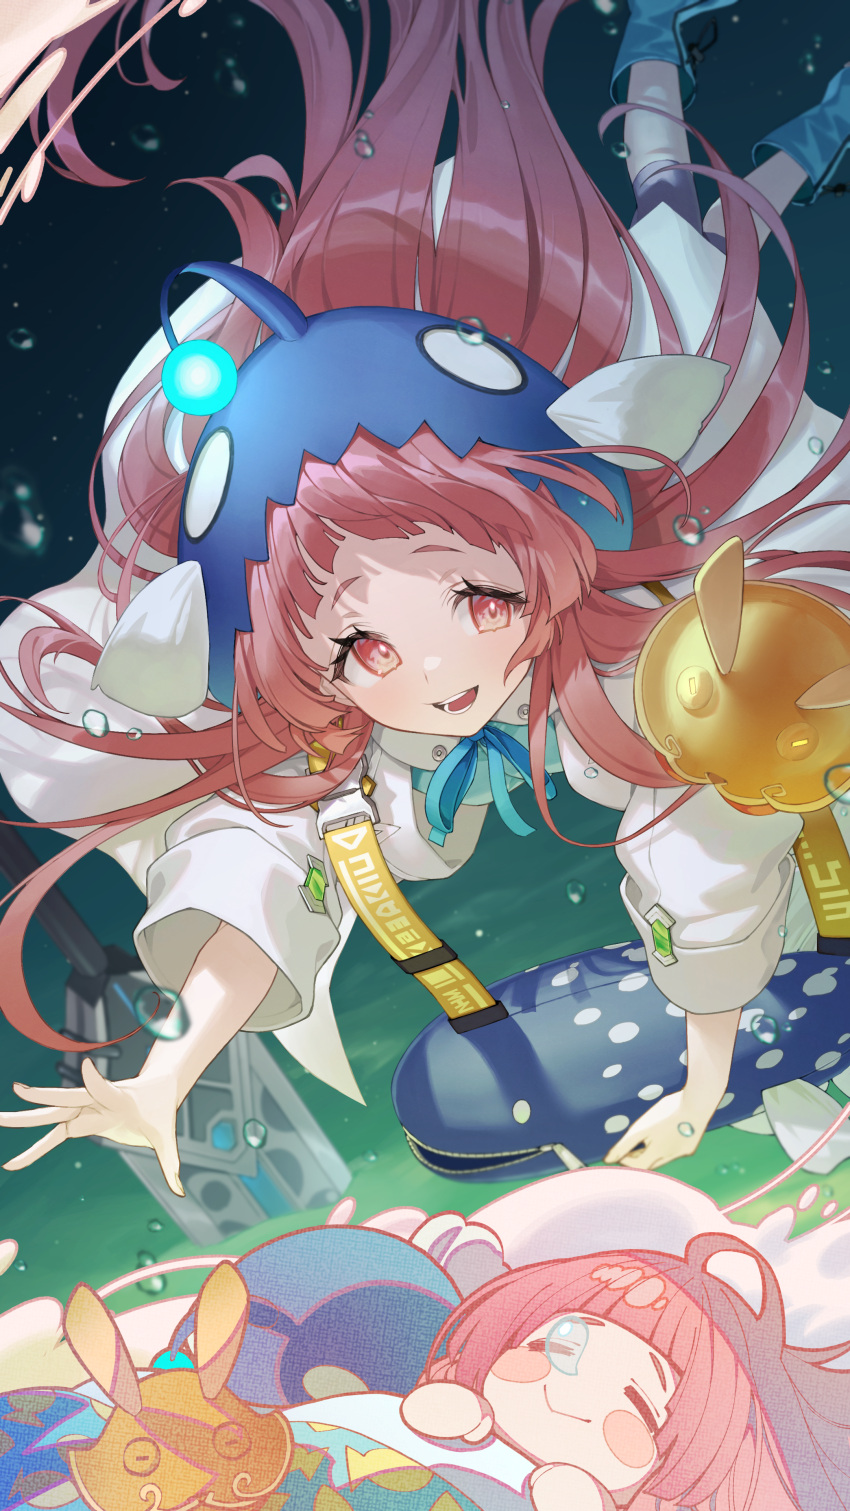 2girls absurdres anglerfish_costume animal_bag bag blue_footwear blue_ribbon boots chibi closed_eyes closed_mouth fish_hat heaven_burns_red highres holding holding_bag jacket long_hair long_sleeves looking_at_viewer mizuhara_aina multiple_girls neck_ribbon nose_bubble open_mouth pink_eyes pink_hair ribbon rin31153336 rubber_boots sleeping umbrella_octopus underwater upper_body white_jacket